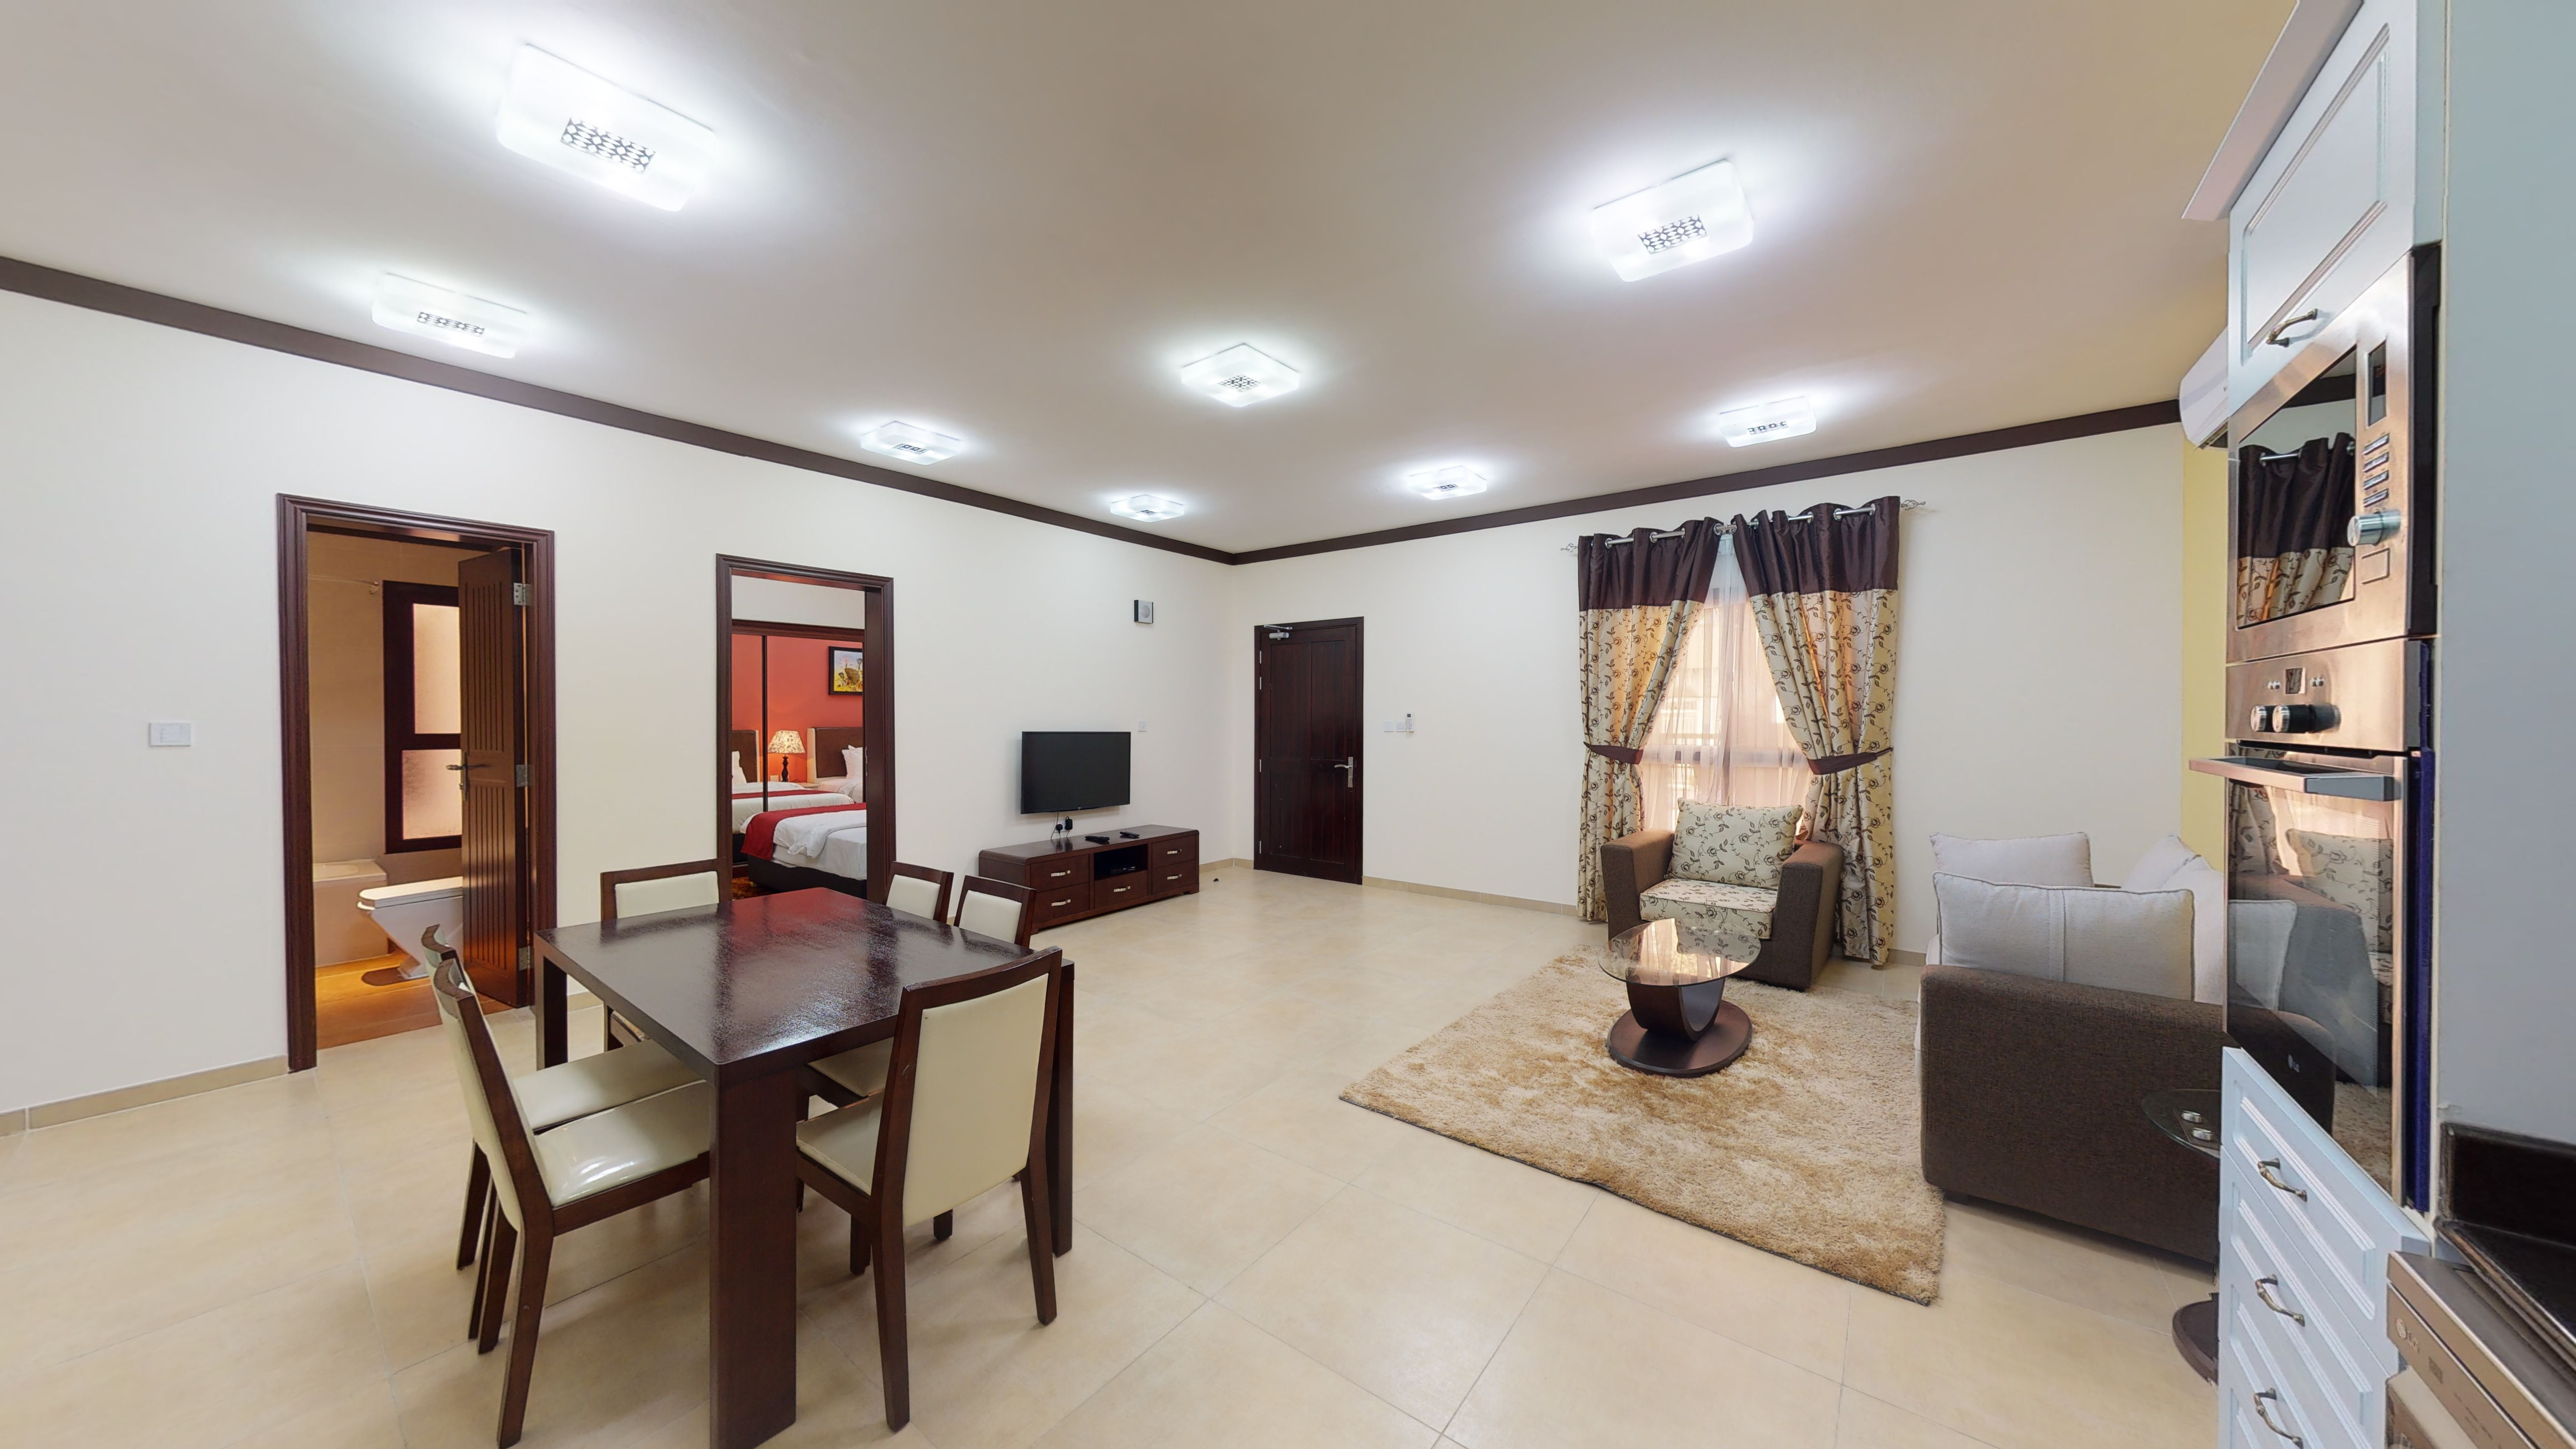 2 bedrooms furnished compound apartment in Al Messila P-160